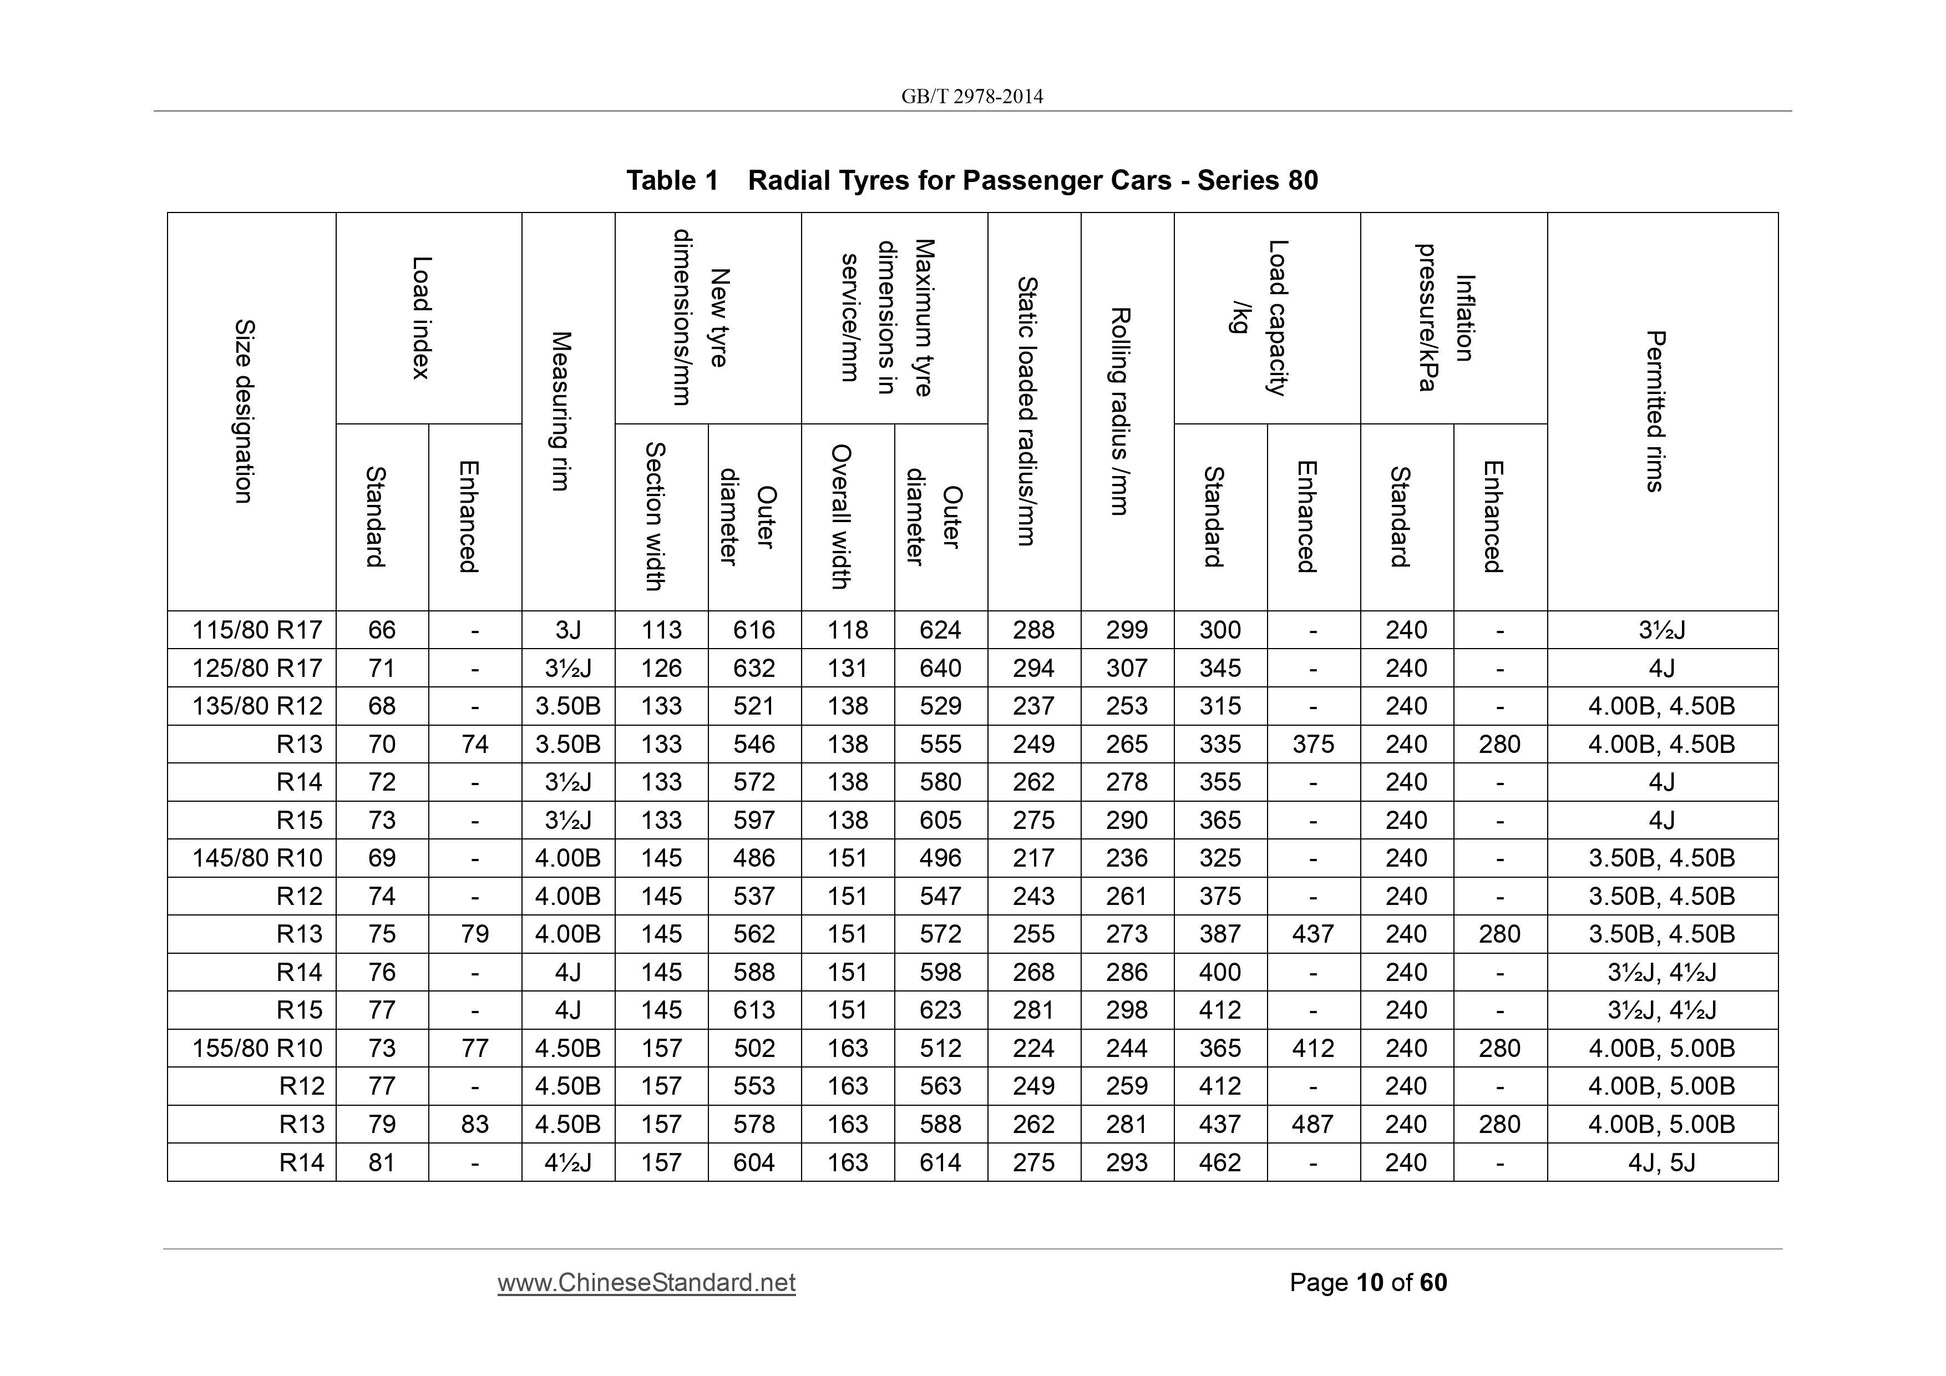 GB/T 2978-2014 Page 8